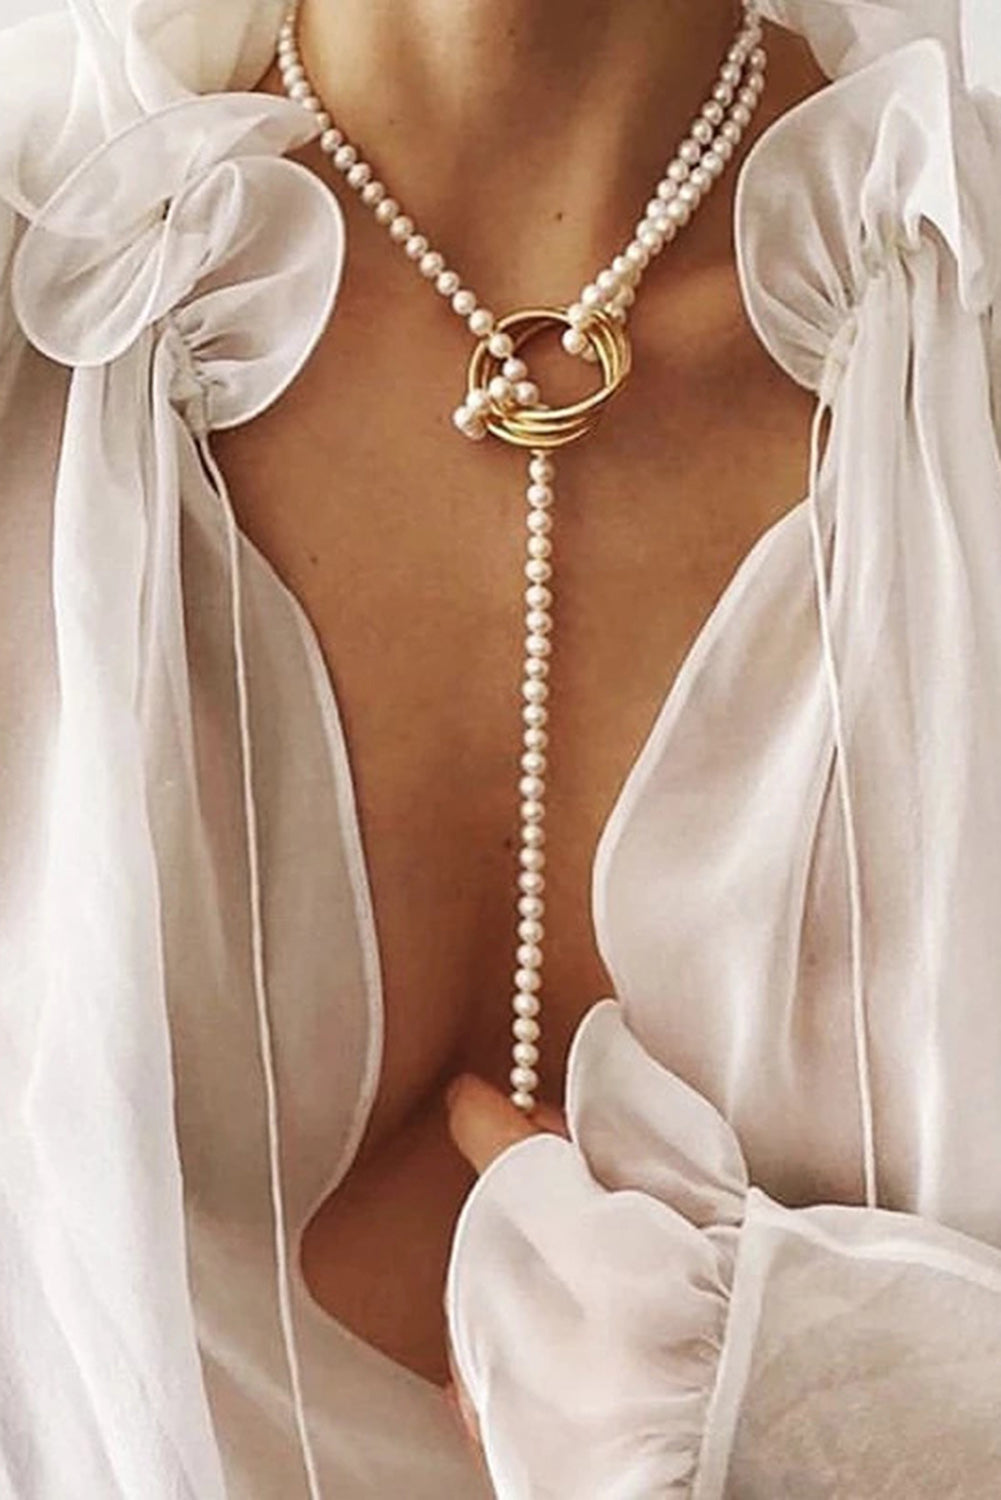 She Wore a Pearl Necklace